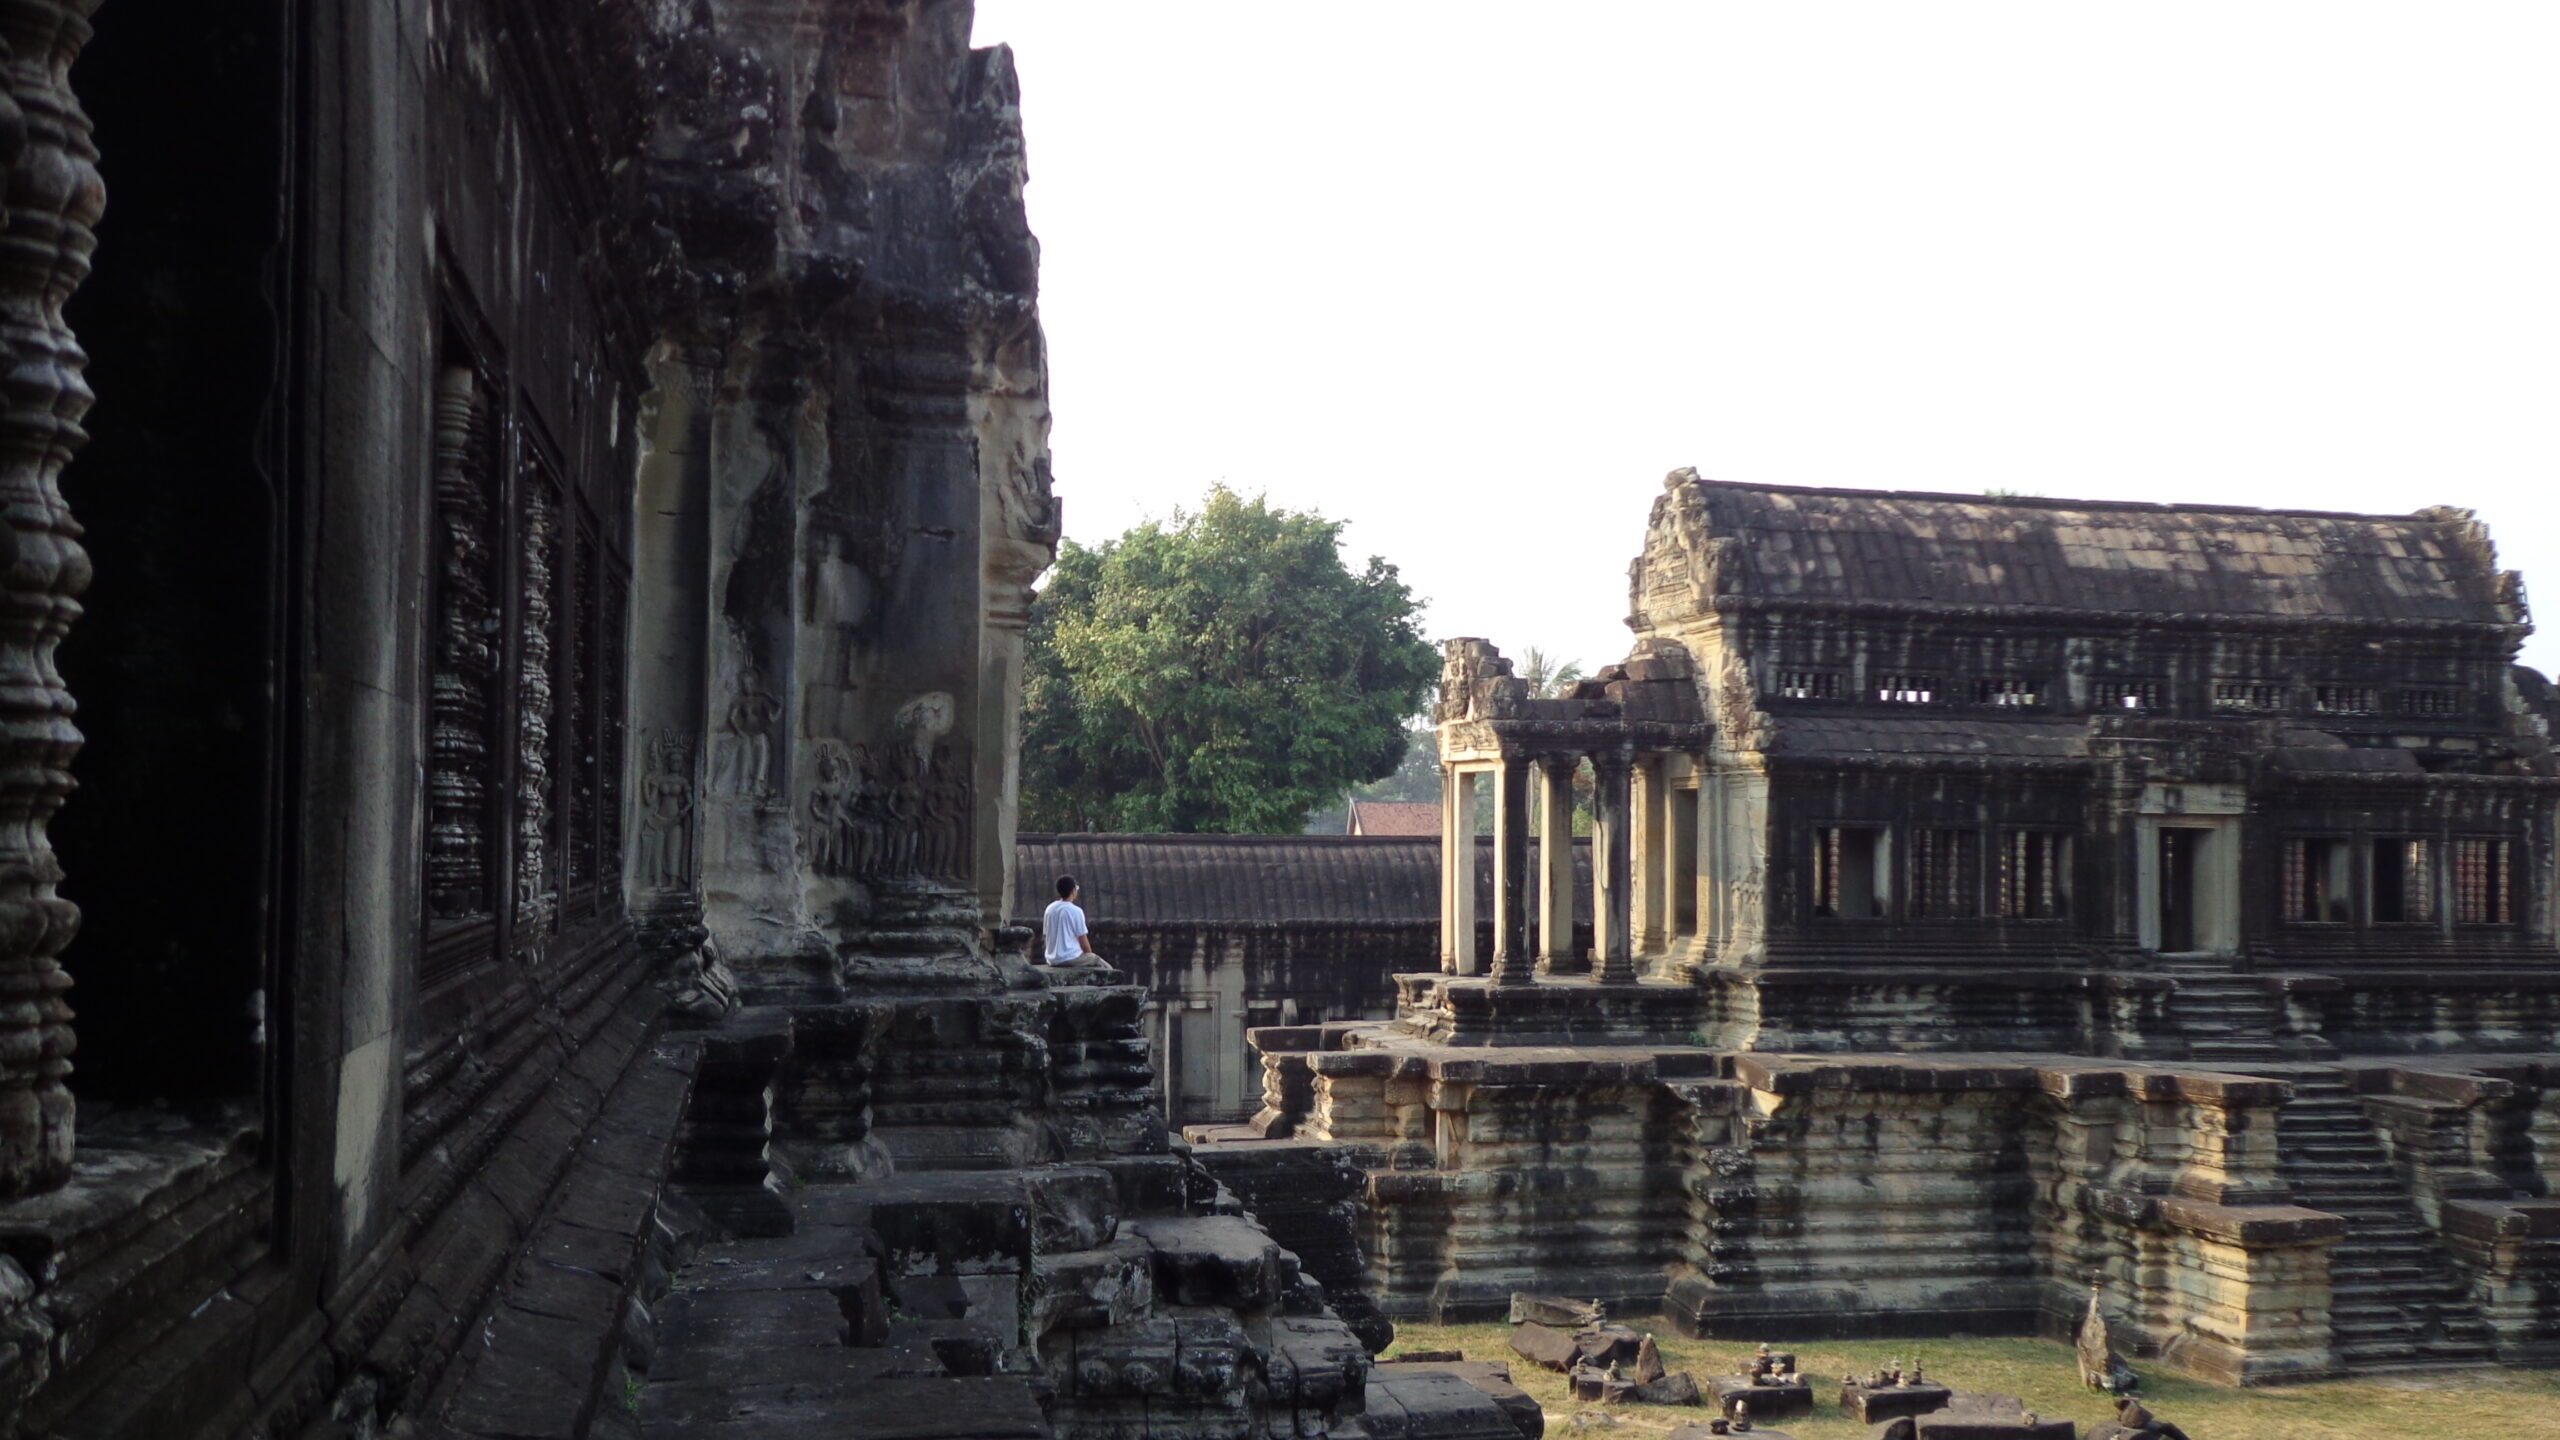 Travel guide to Cambodia